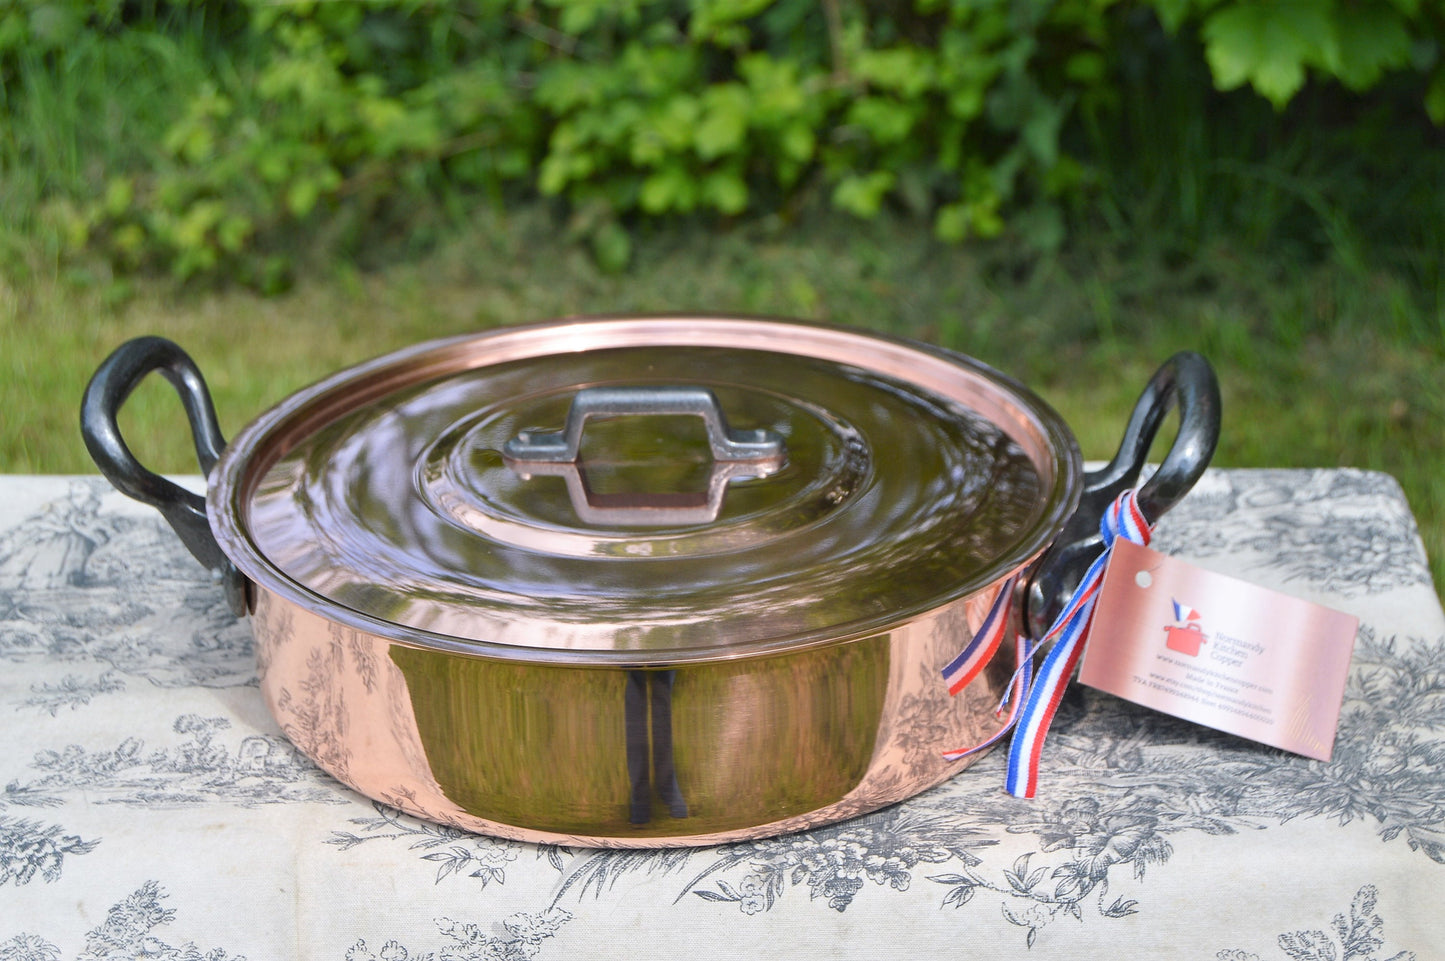 New NKC Copper 28cm Rondeau 28 cm 11" Big NKC Saute Two Handle Casserole Cuivre Traditionally Made Tin lined New Normandy Kitchen Copper